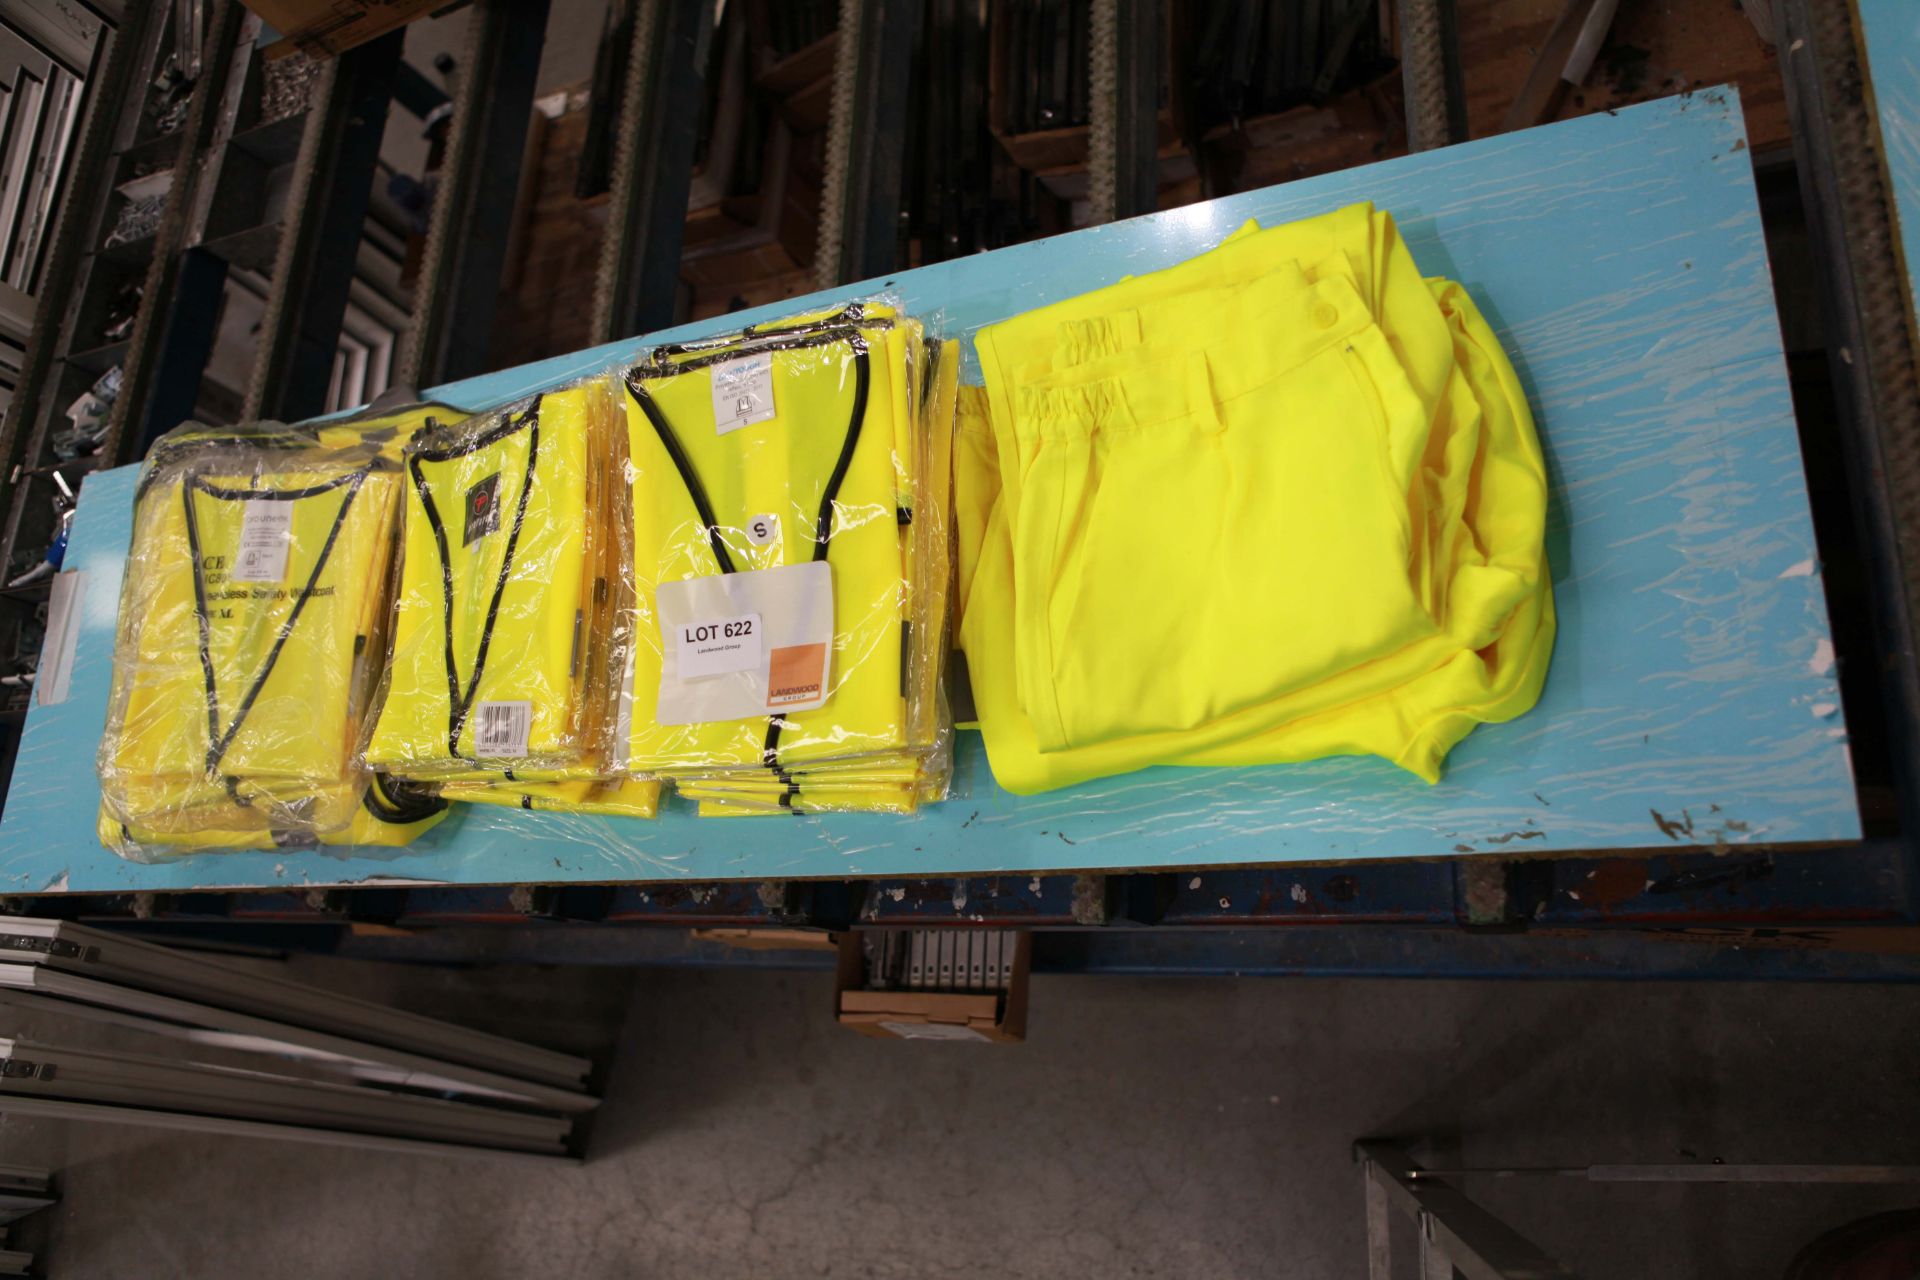 Packets of New Hi Viz Vests and 3 pairs of trousers